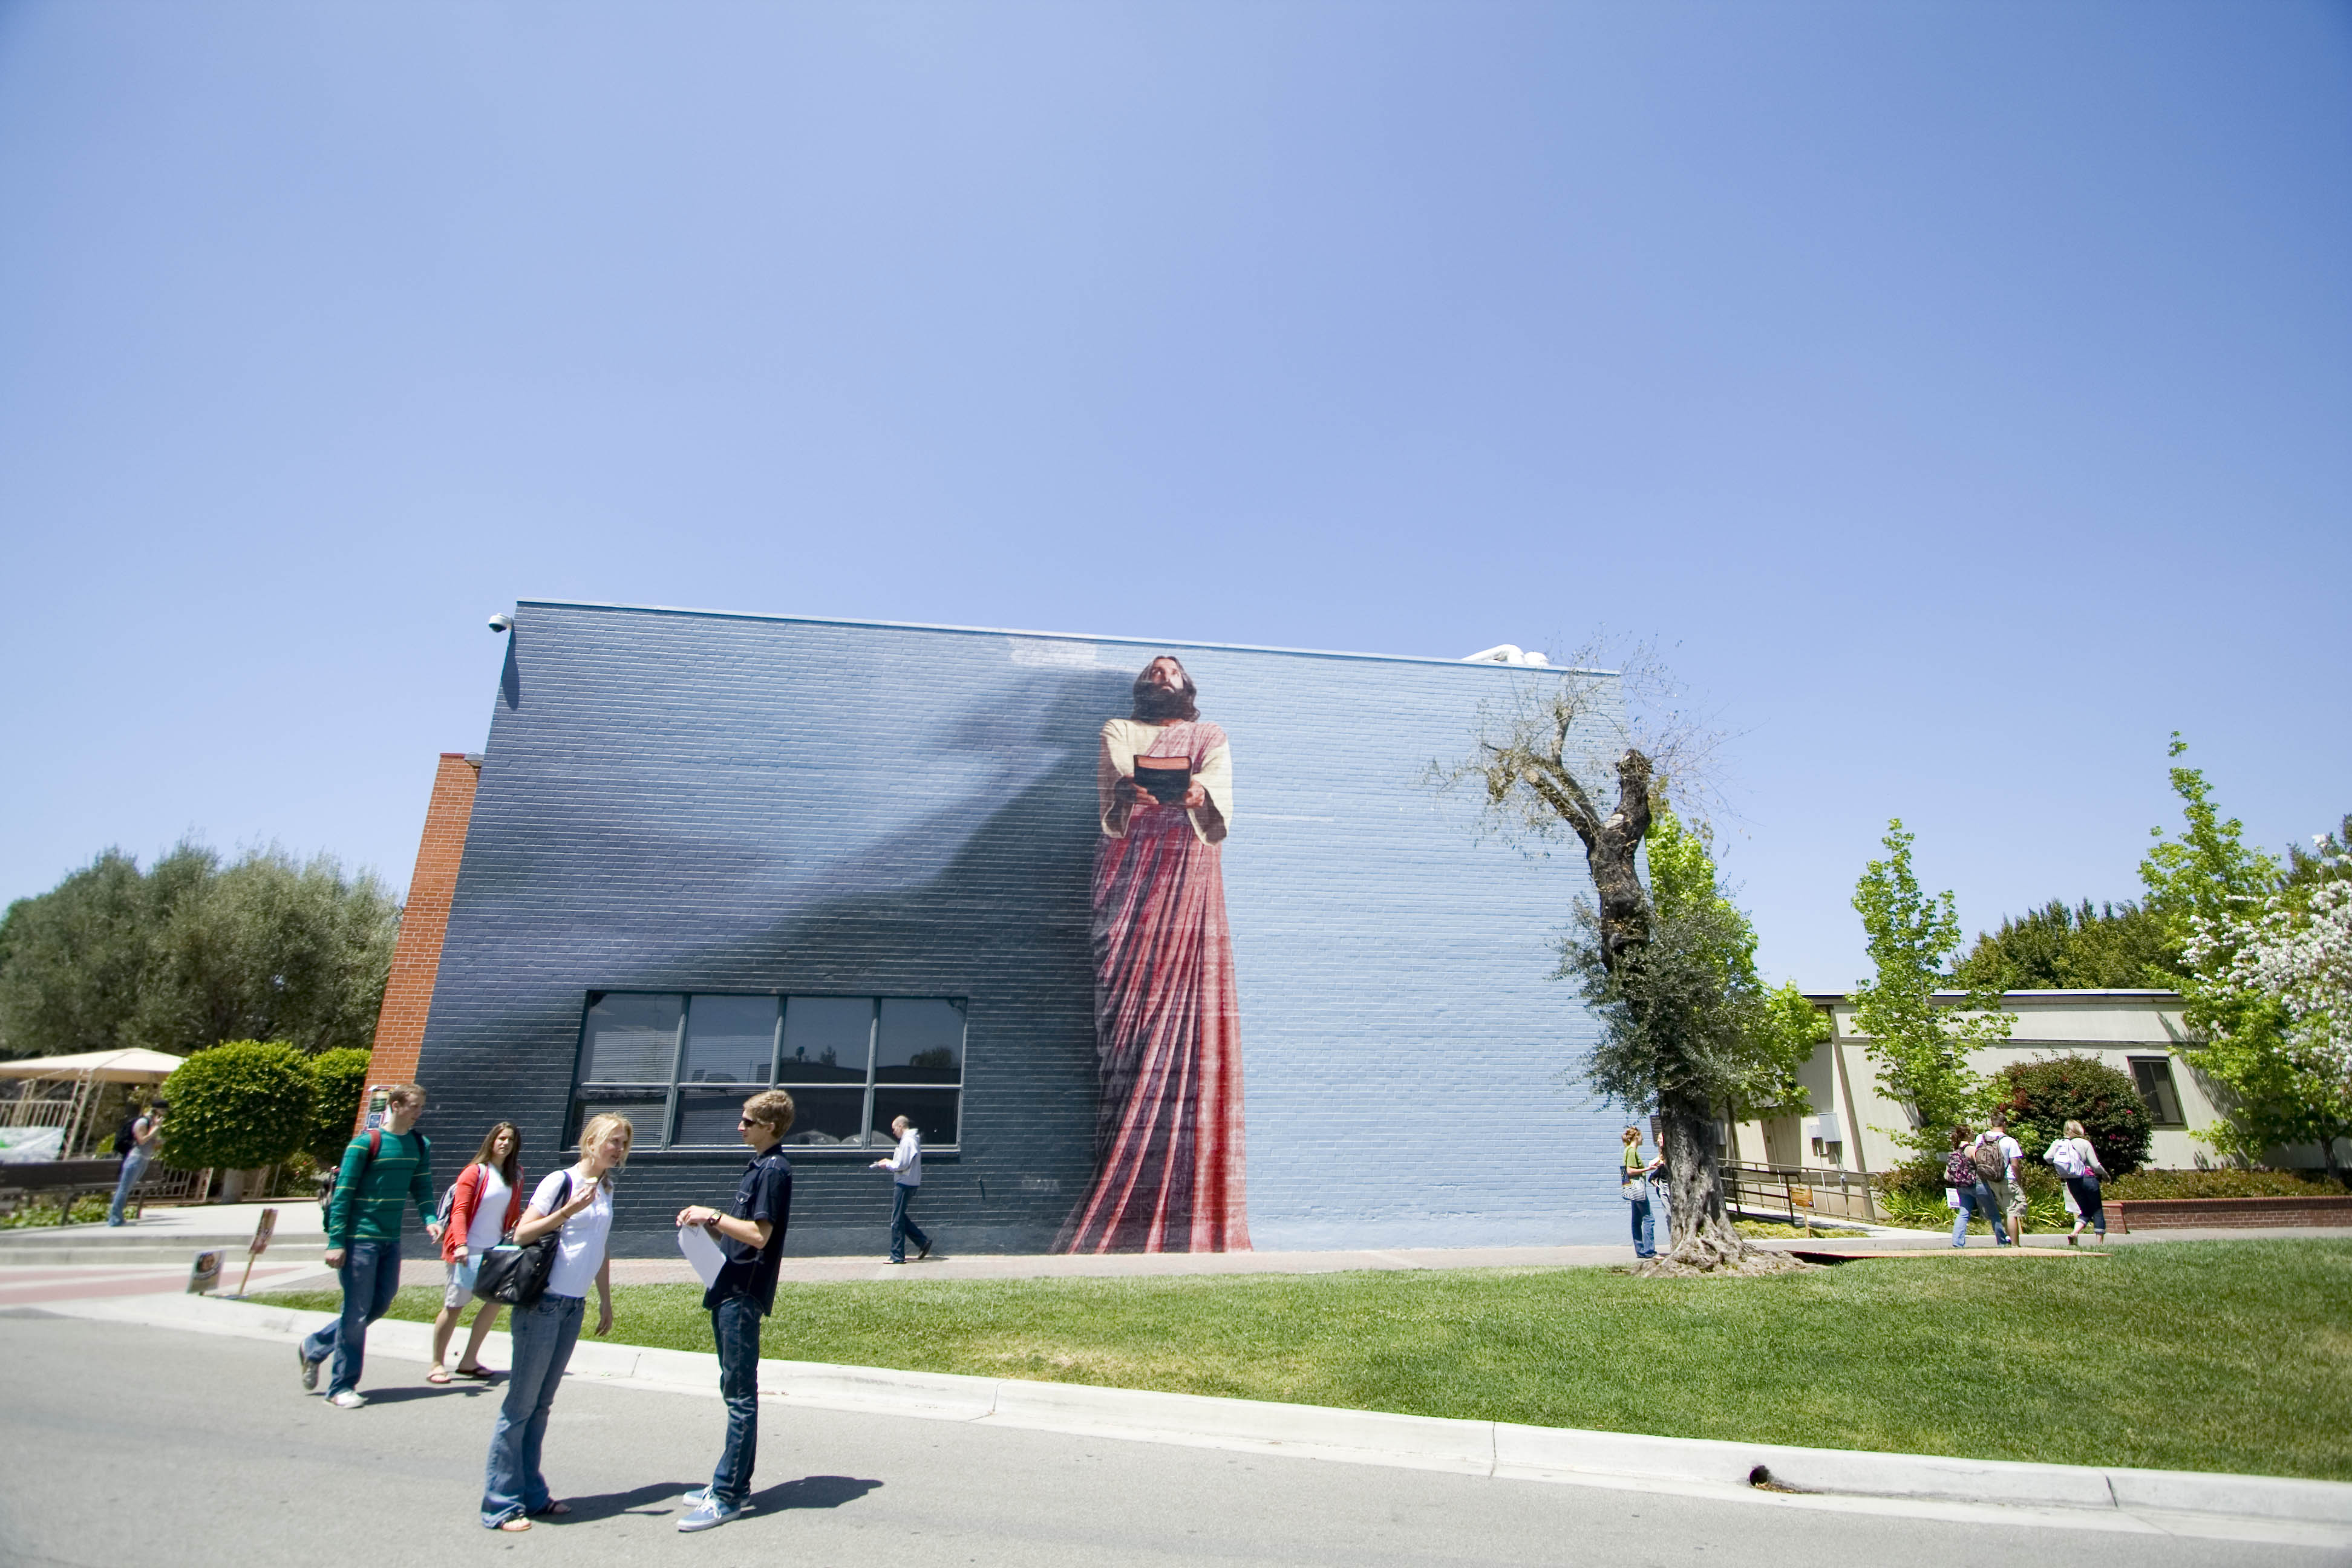 Tuesday April 21, Biola faulty met for a second time in order to further the discussion on the issues surrounding the Jesus mural. They will be meeting next week to close the issue and come to a final decision. Photo by Mike Villa